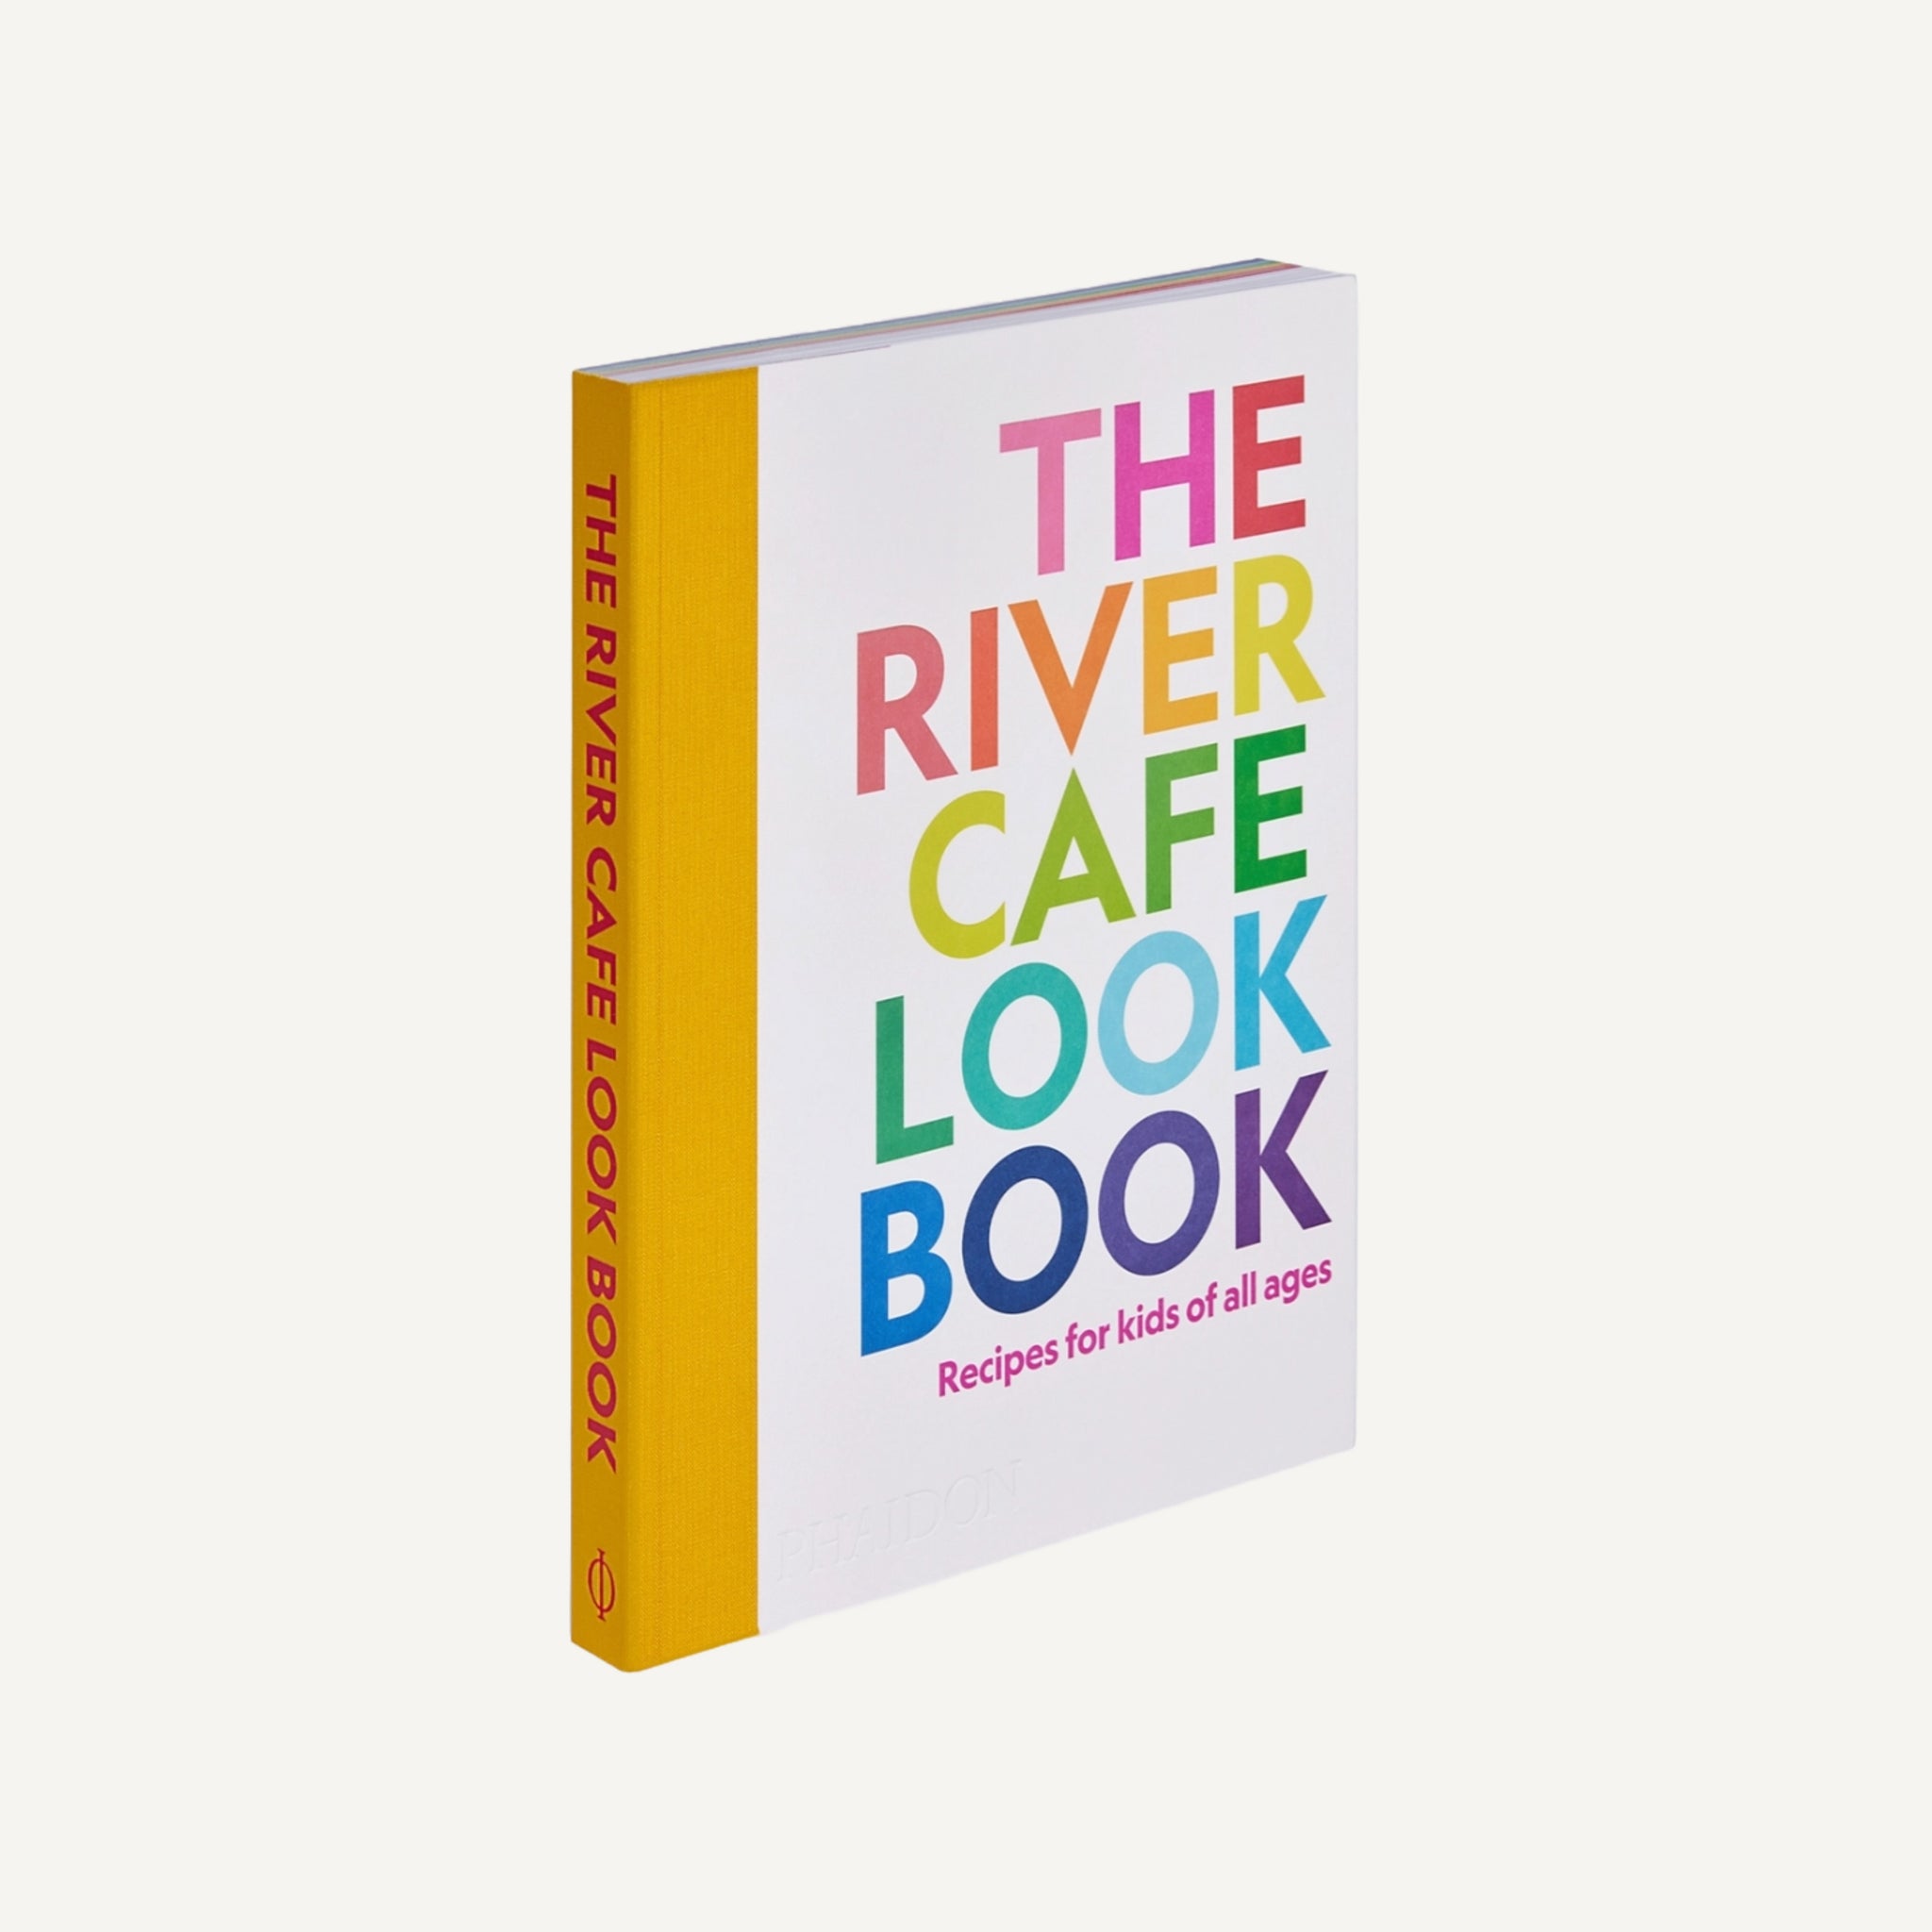 THE RIVER CAFE LOOK BOOK: RECIPES FOR KIDS OF ALL AGES